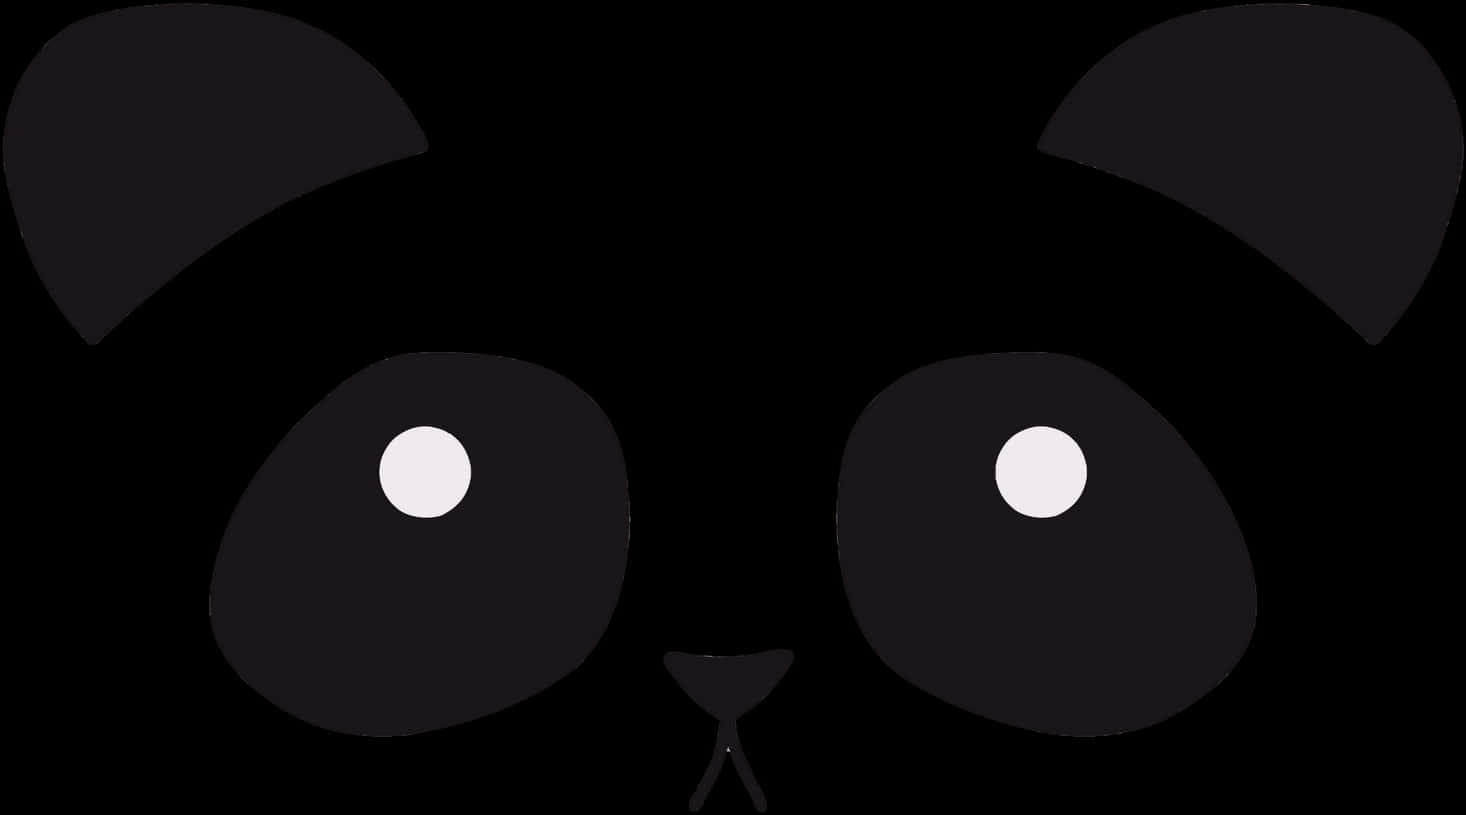 A Black Cat Face With White Dots